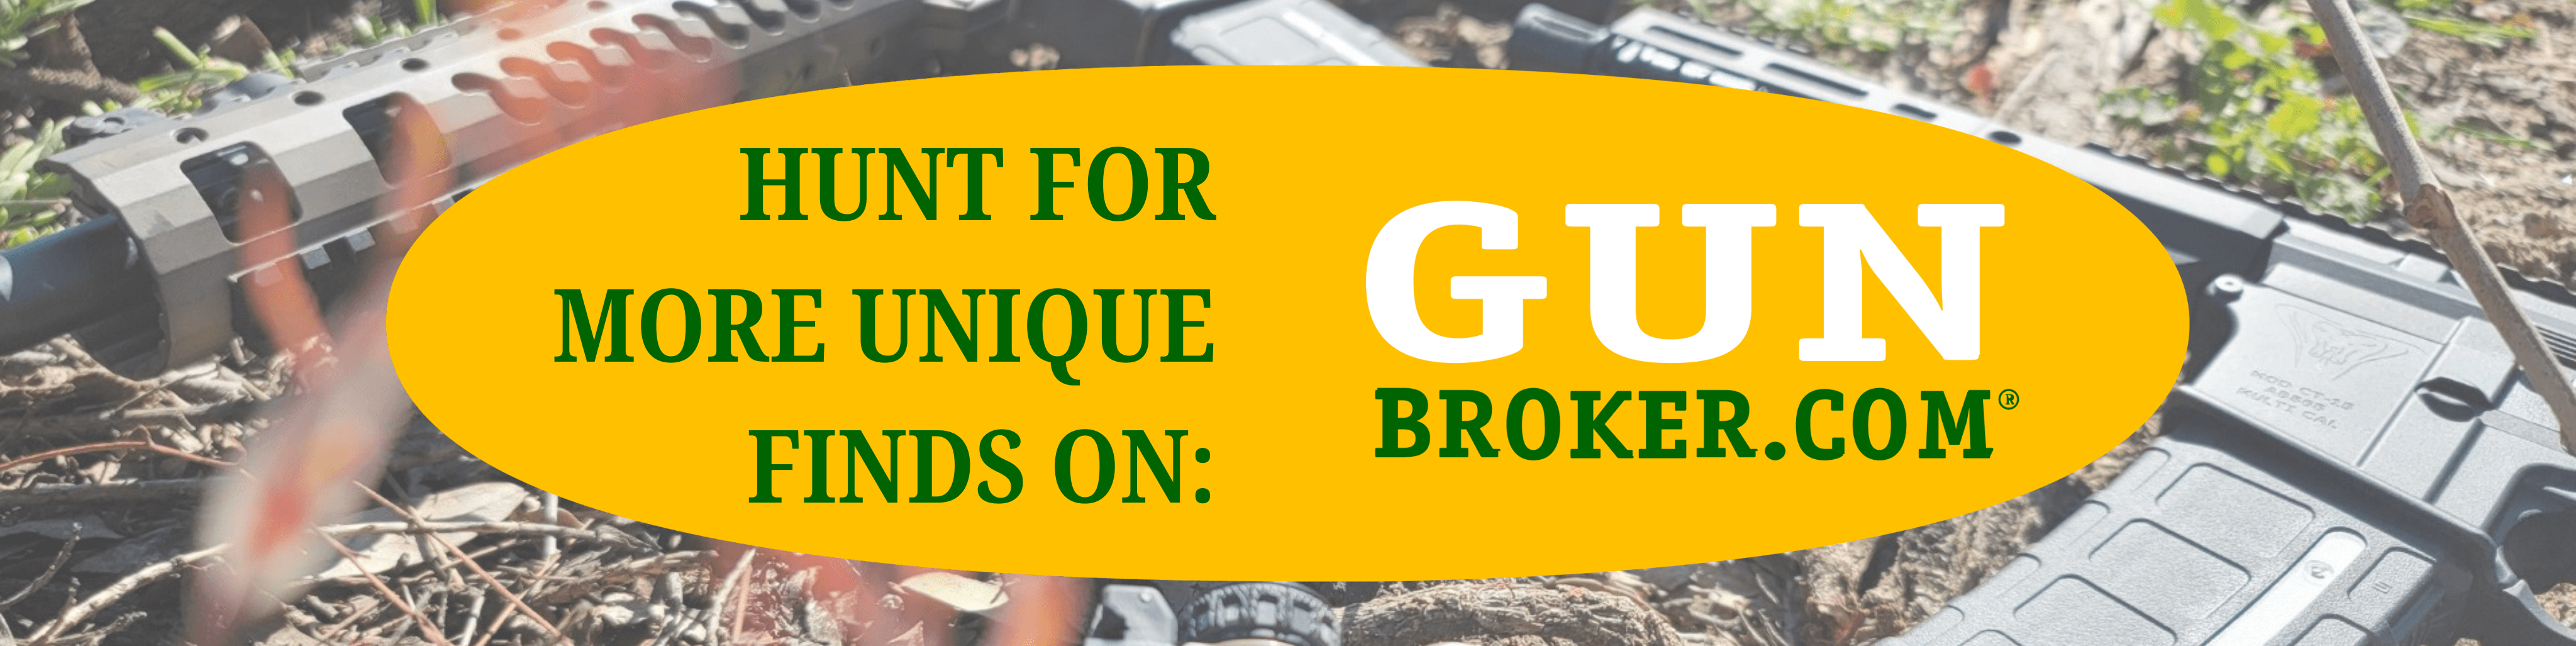 https://www.gunbroker.com/All/search?Sort=13&IncludeSellers=2099034&PageSize=25